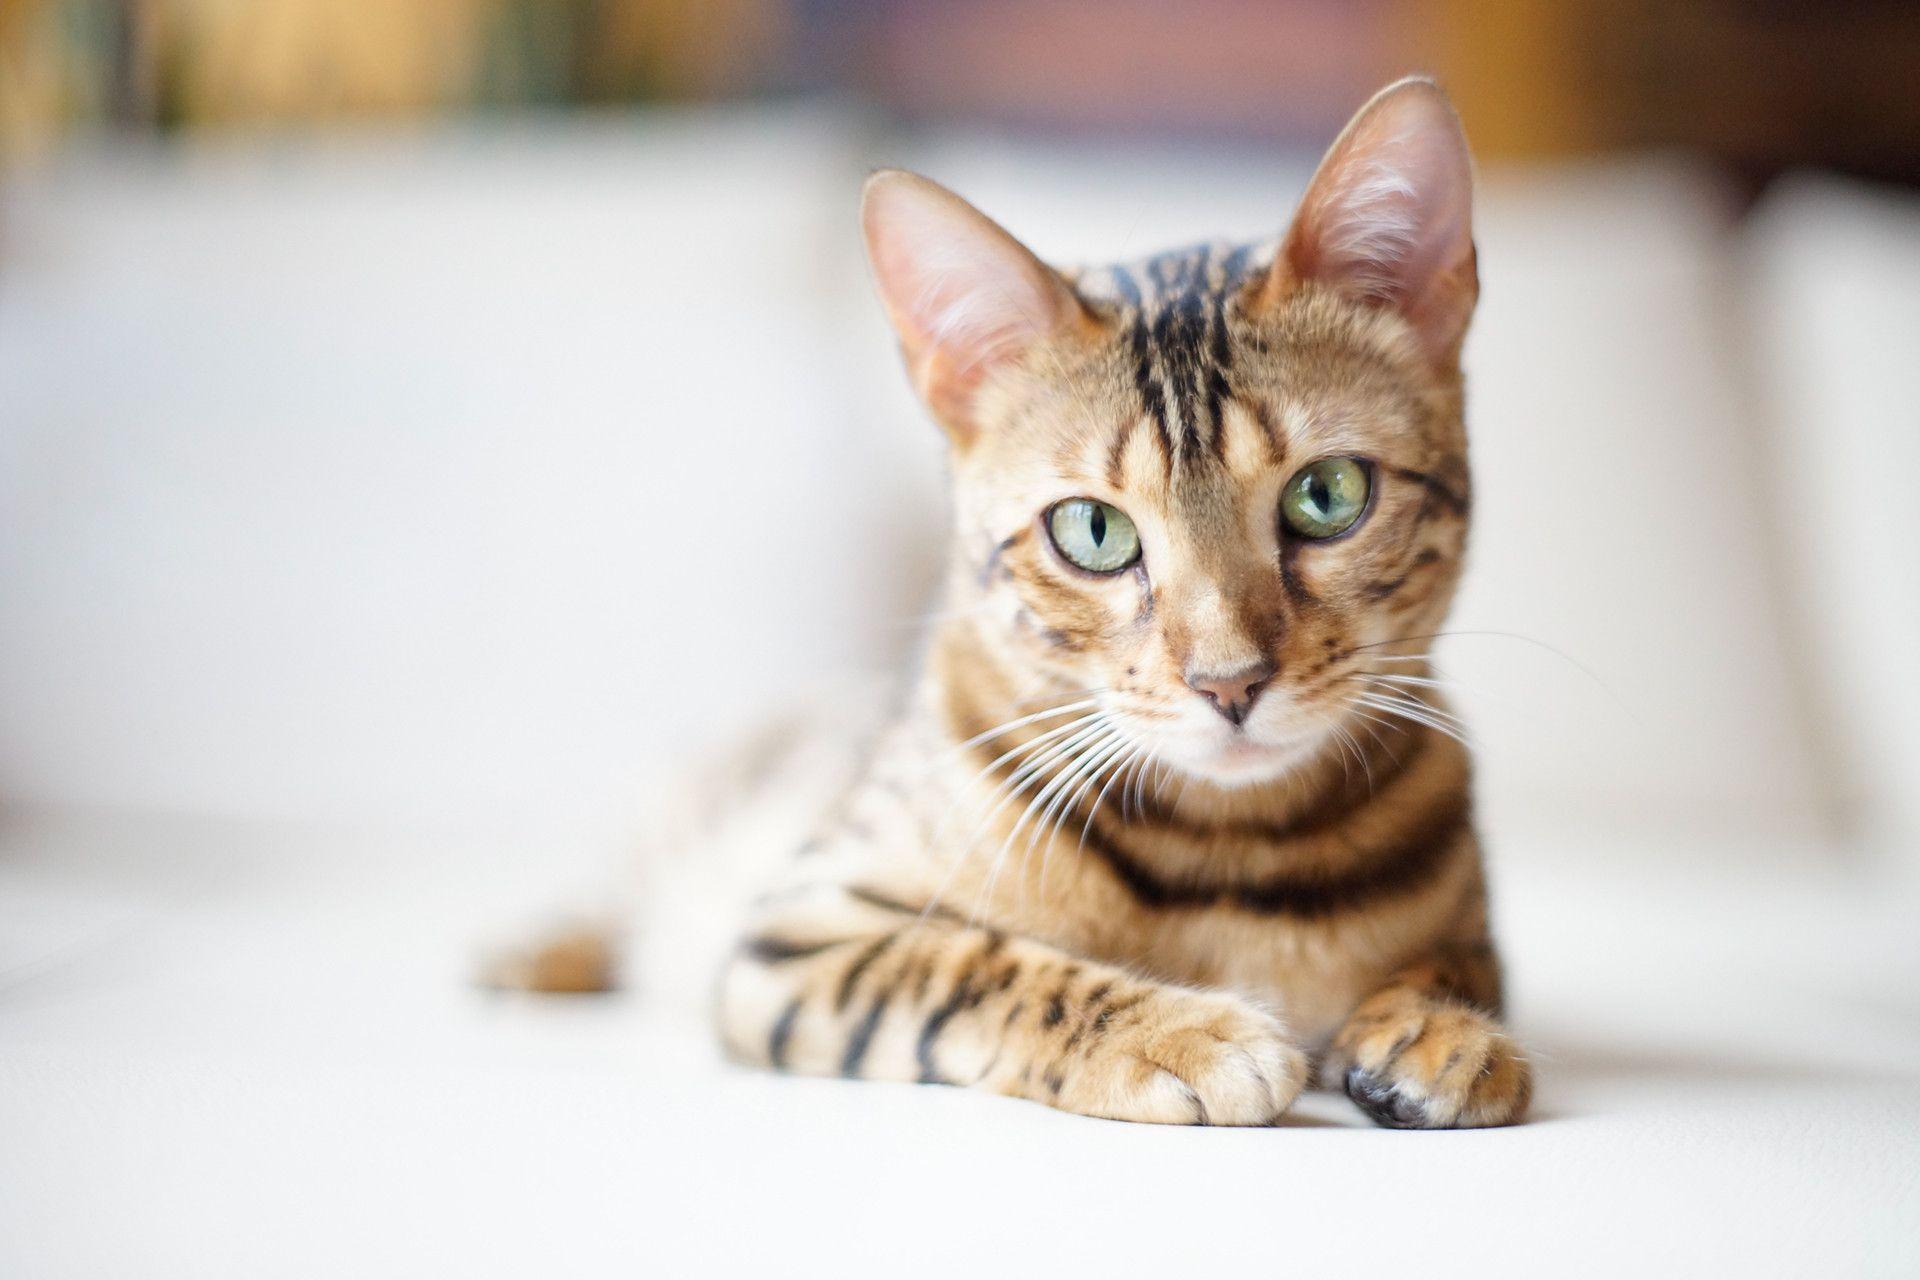 Beautiful Bengal cat on a light background wallpaper and image